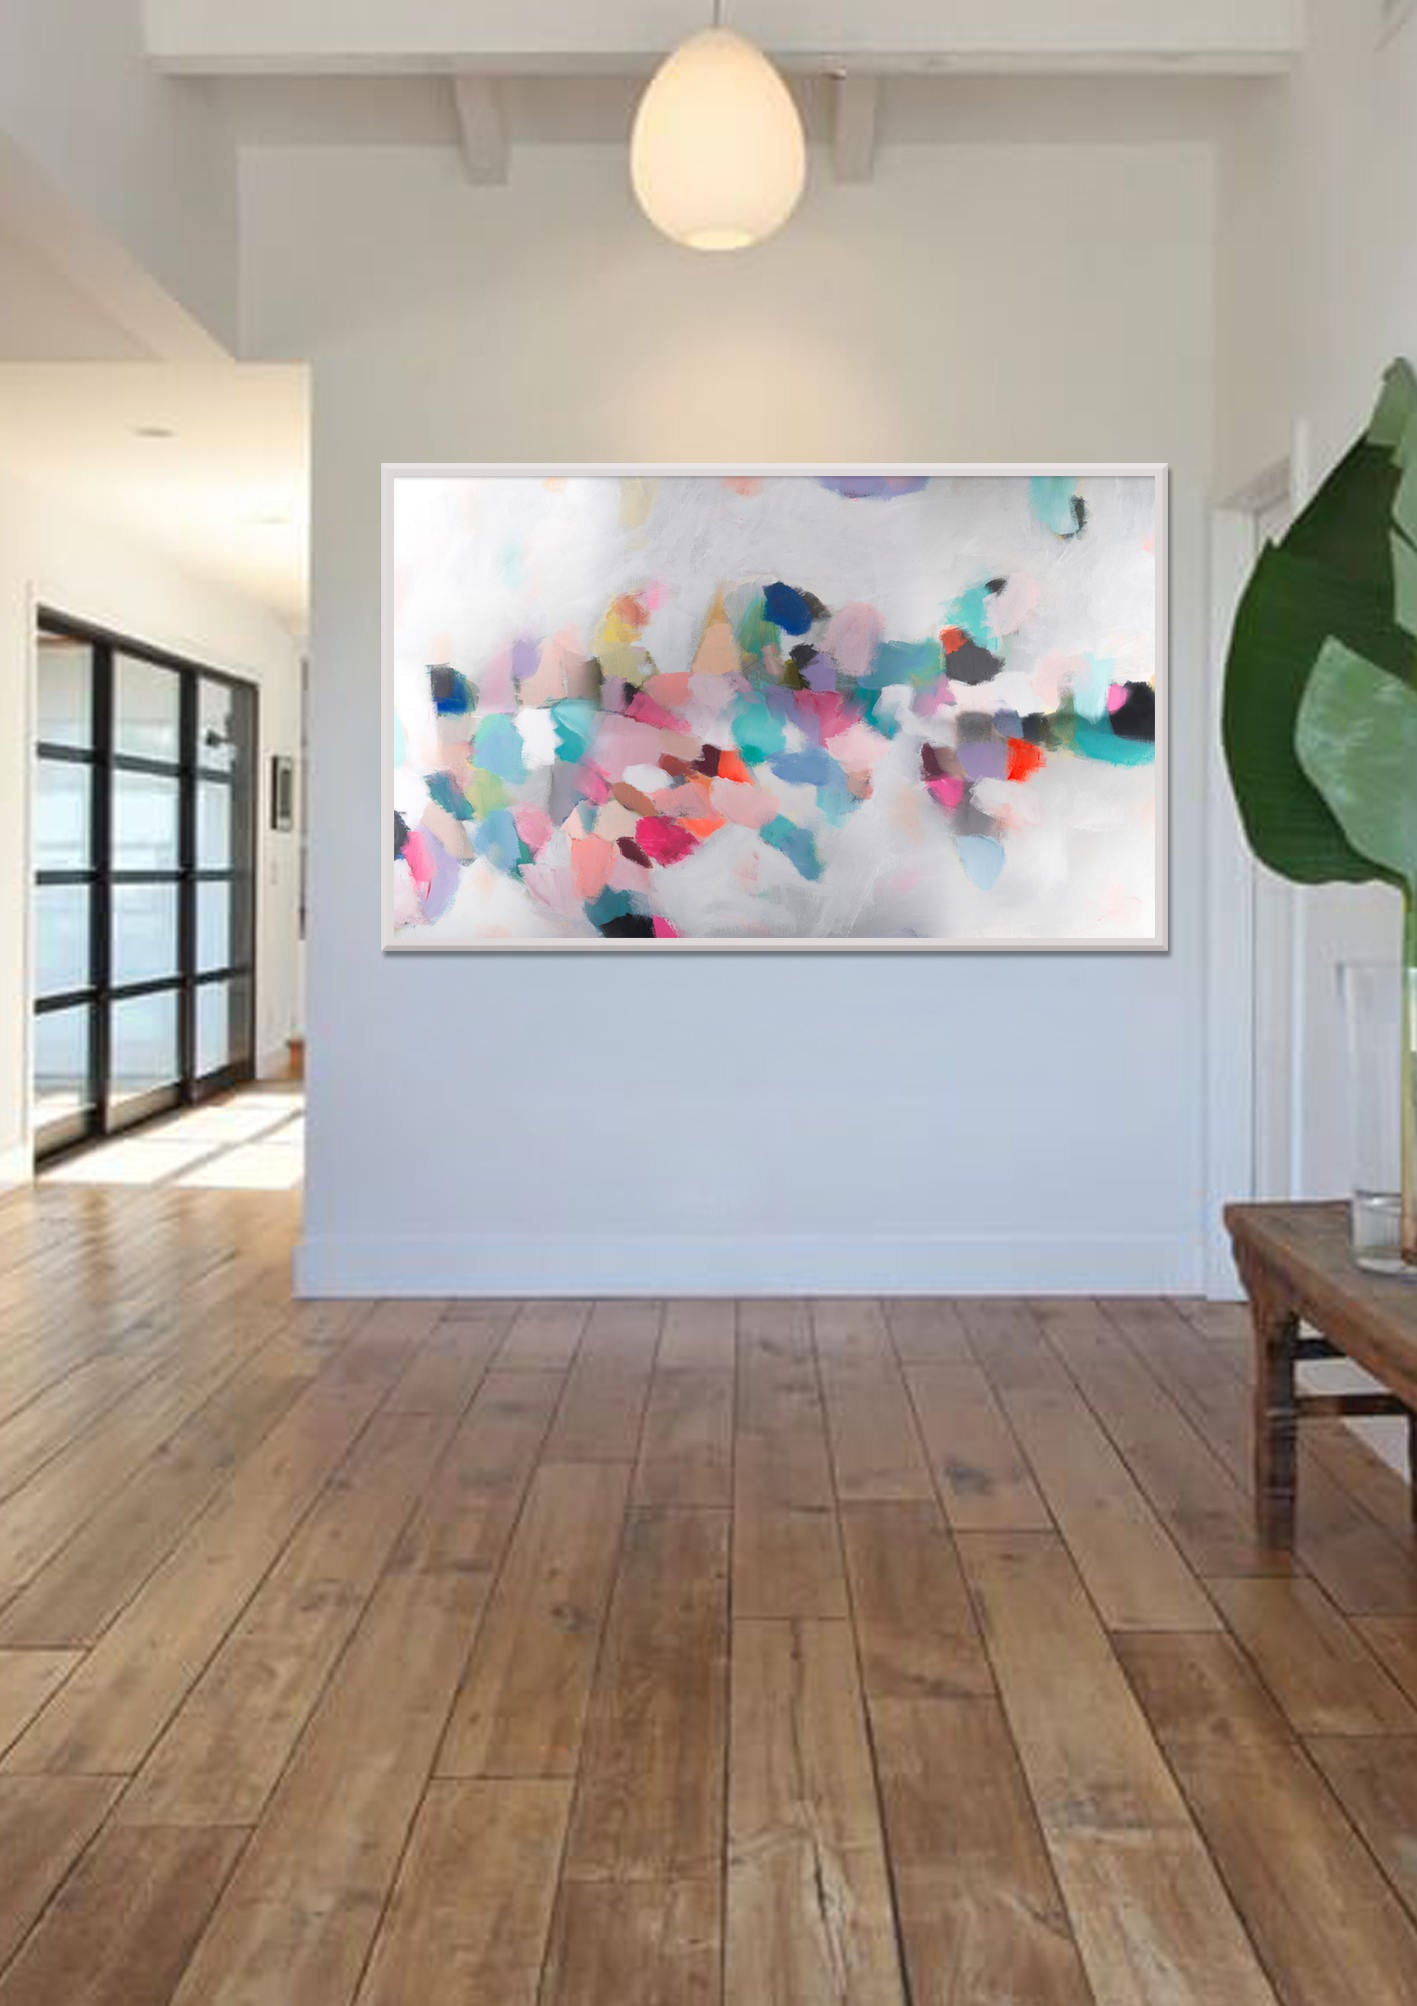 Large modern wall art giclee print, large abstract painting print, colorful painting, acrylic abstract painting by Camilo Mattis - camilomattis.com